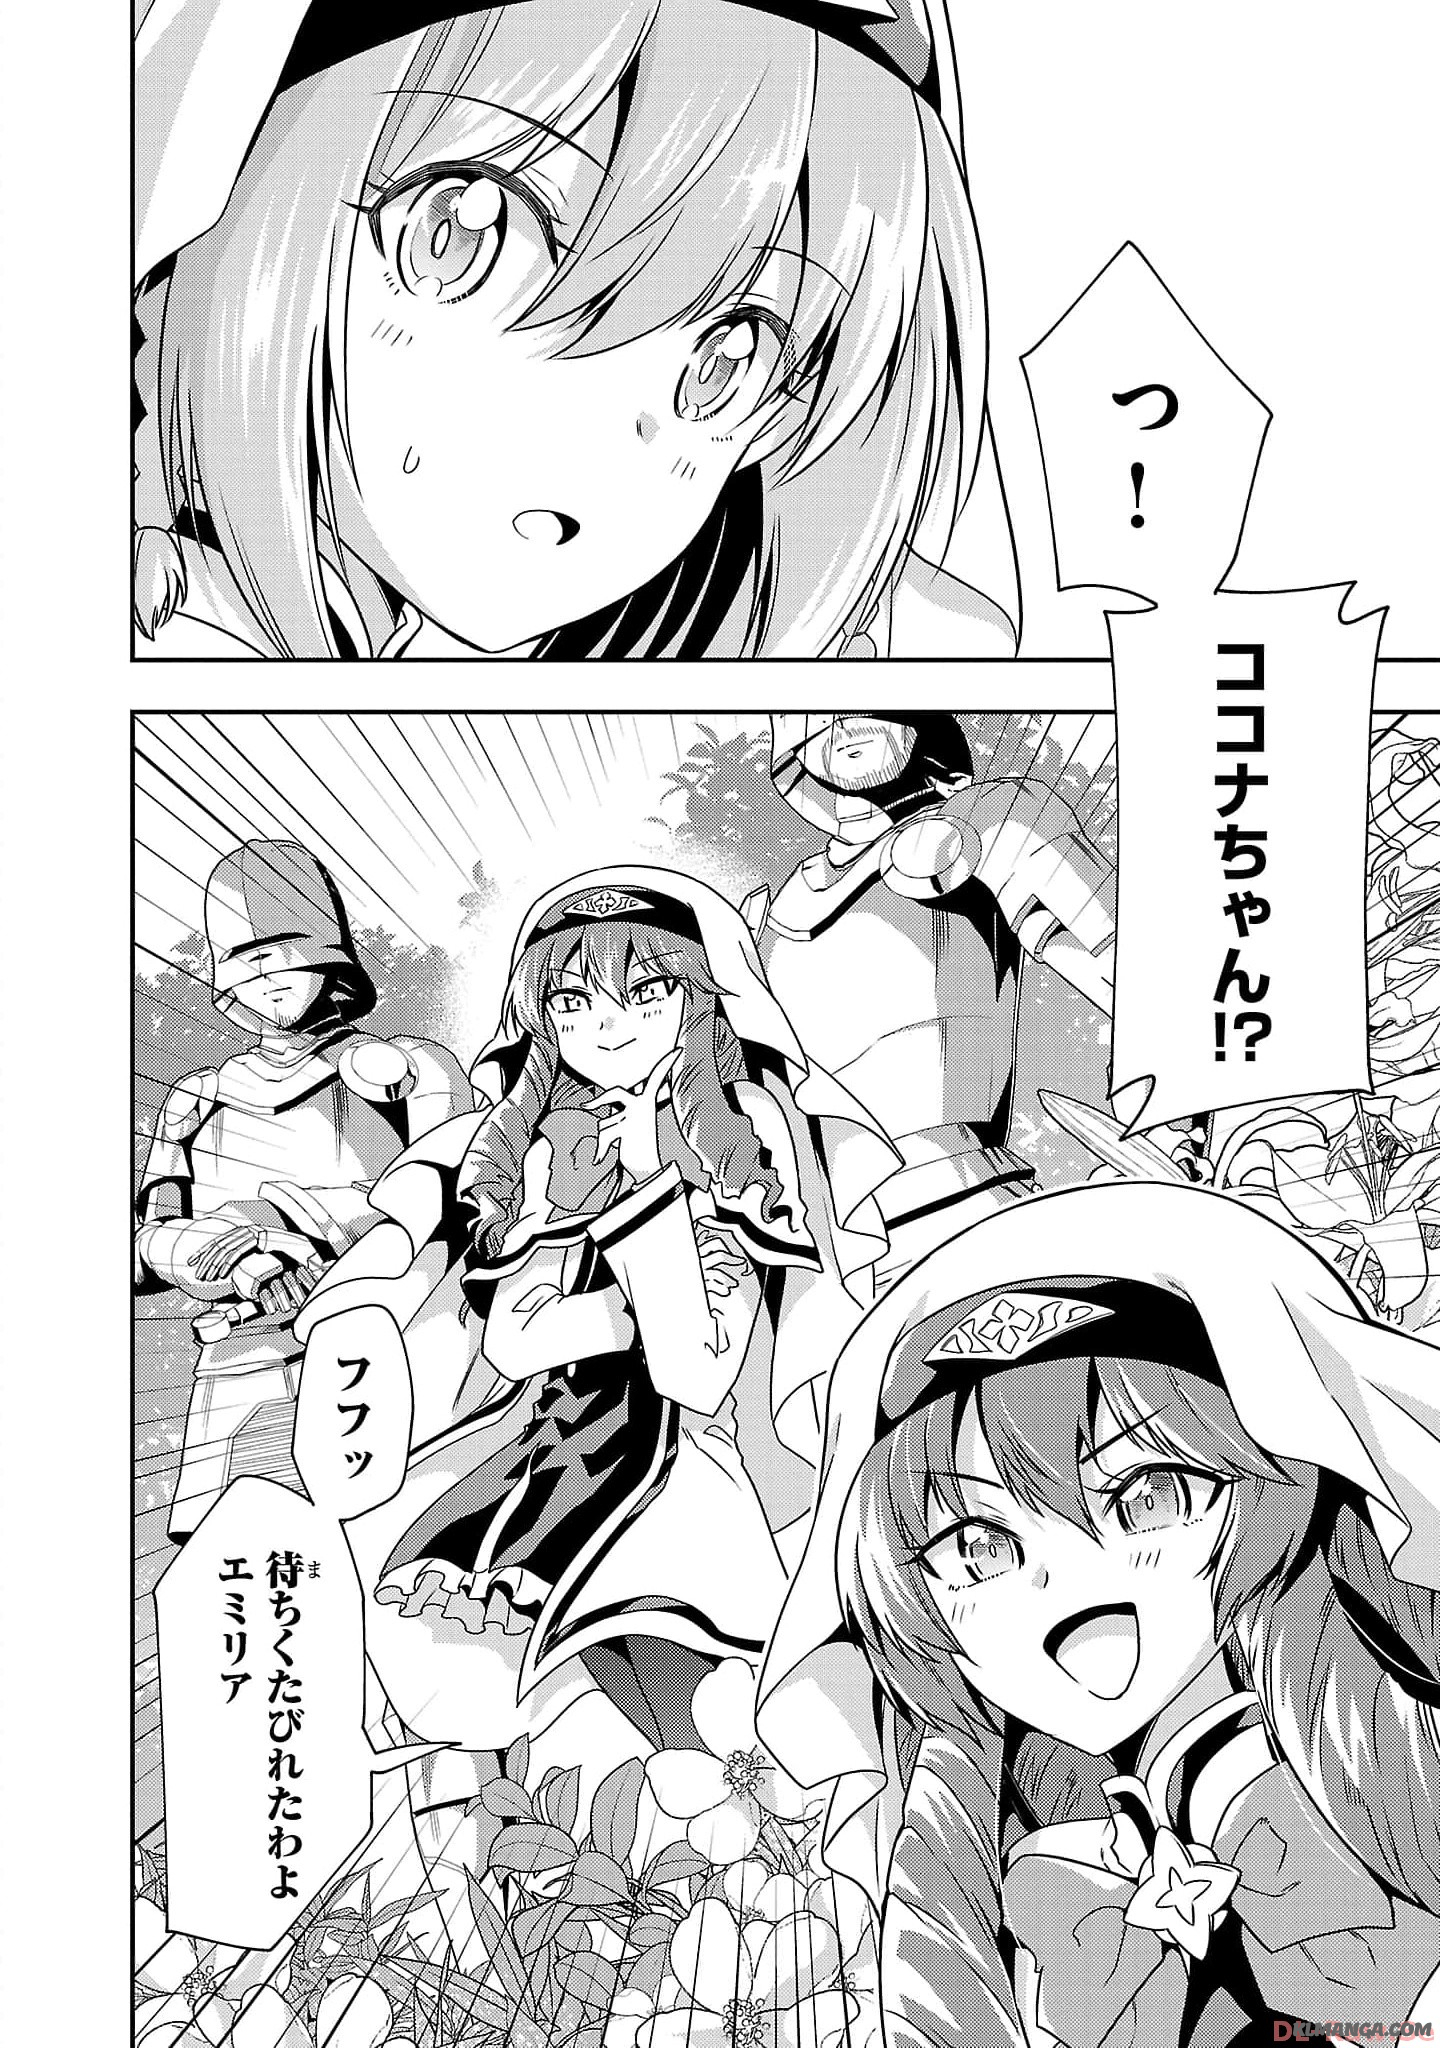 Hungry Saint and Full-Stomach Witch’s Slow Life in Another World! 腹ペコ聖女とまんぷく魔女の異世界スローライフ! 第20話 - Page 26